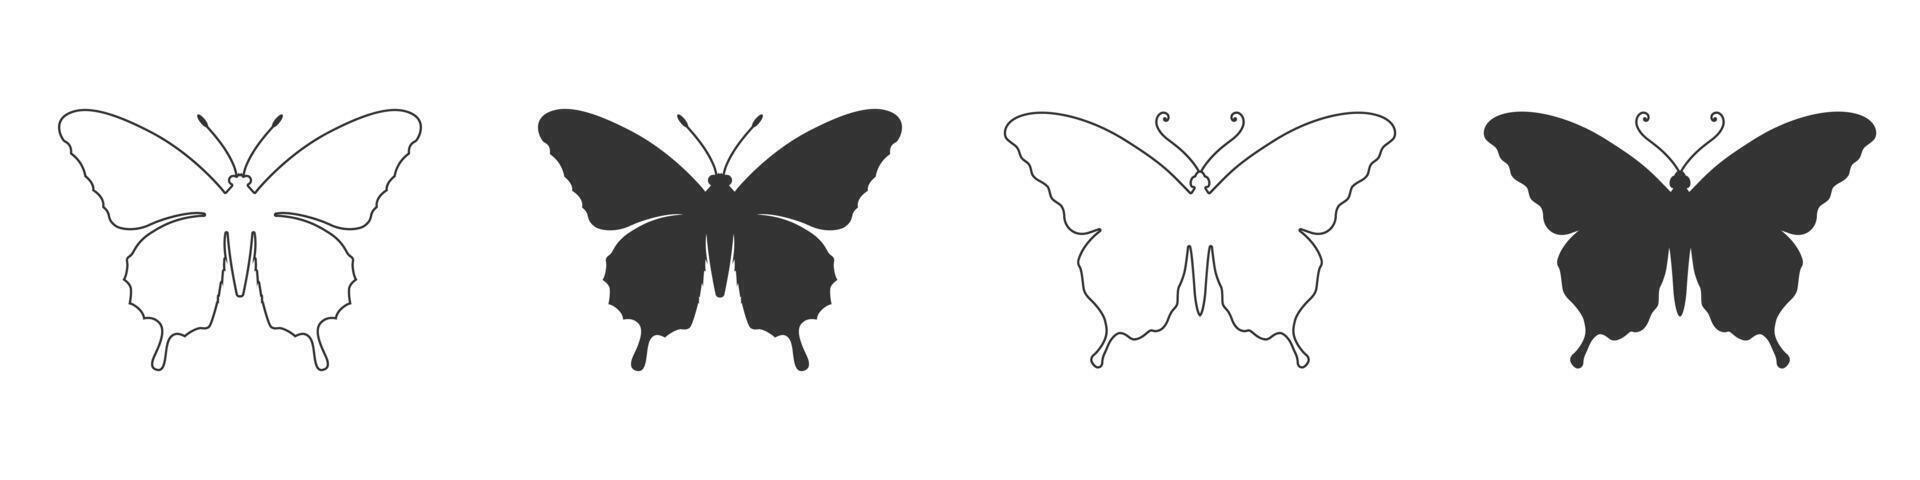 Butterfly icon. Simple design. Vector illustration.